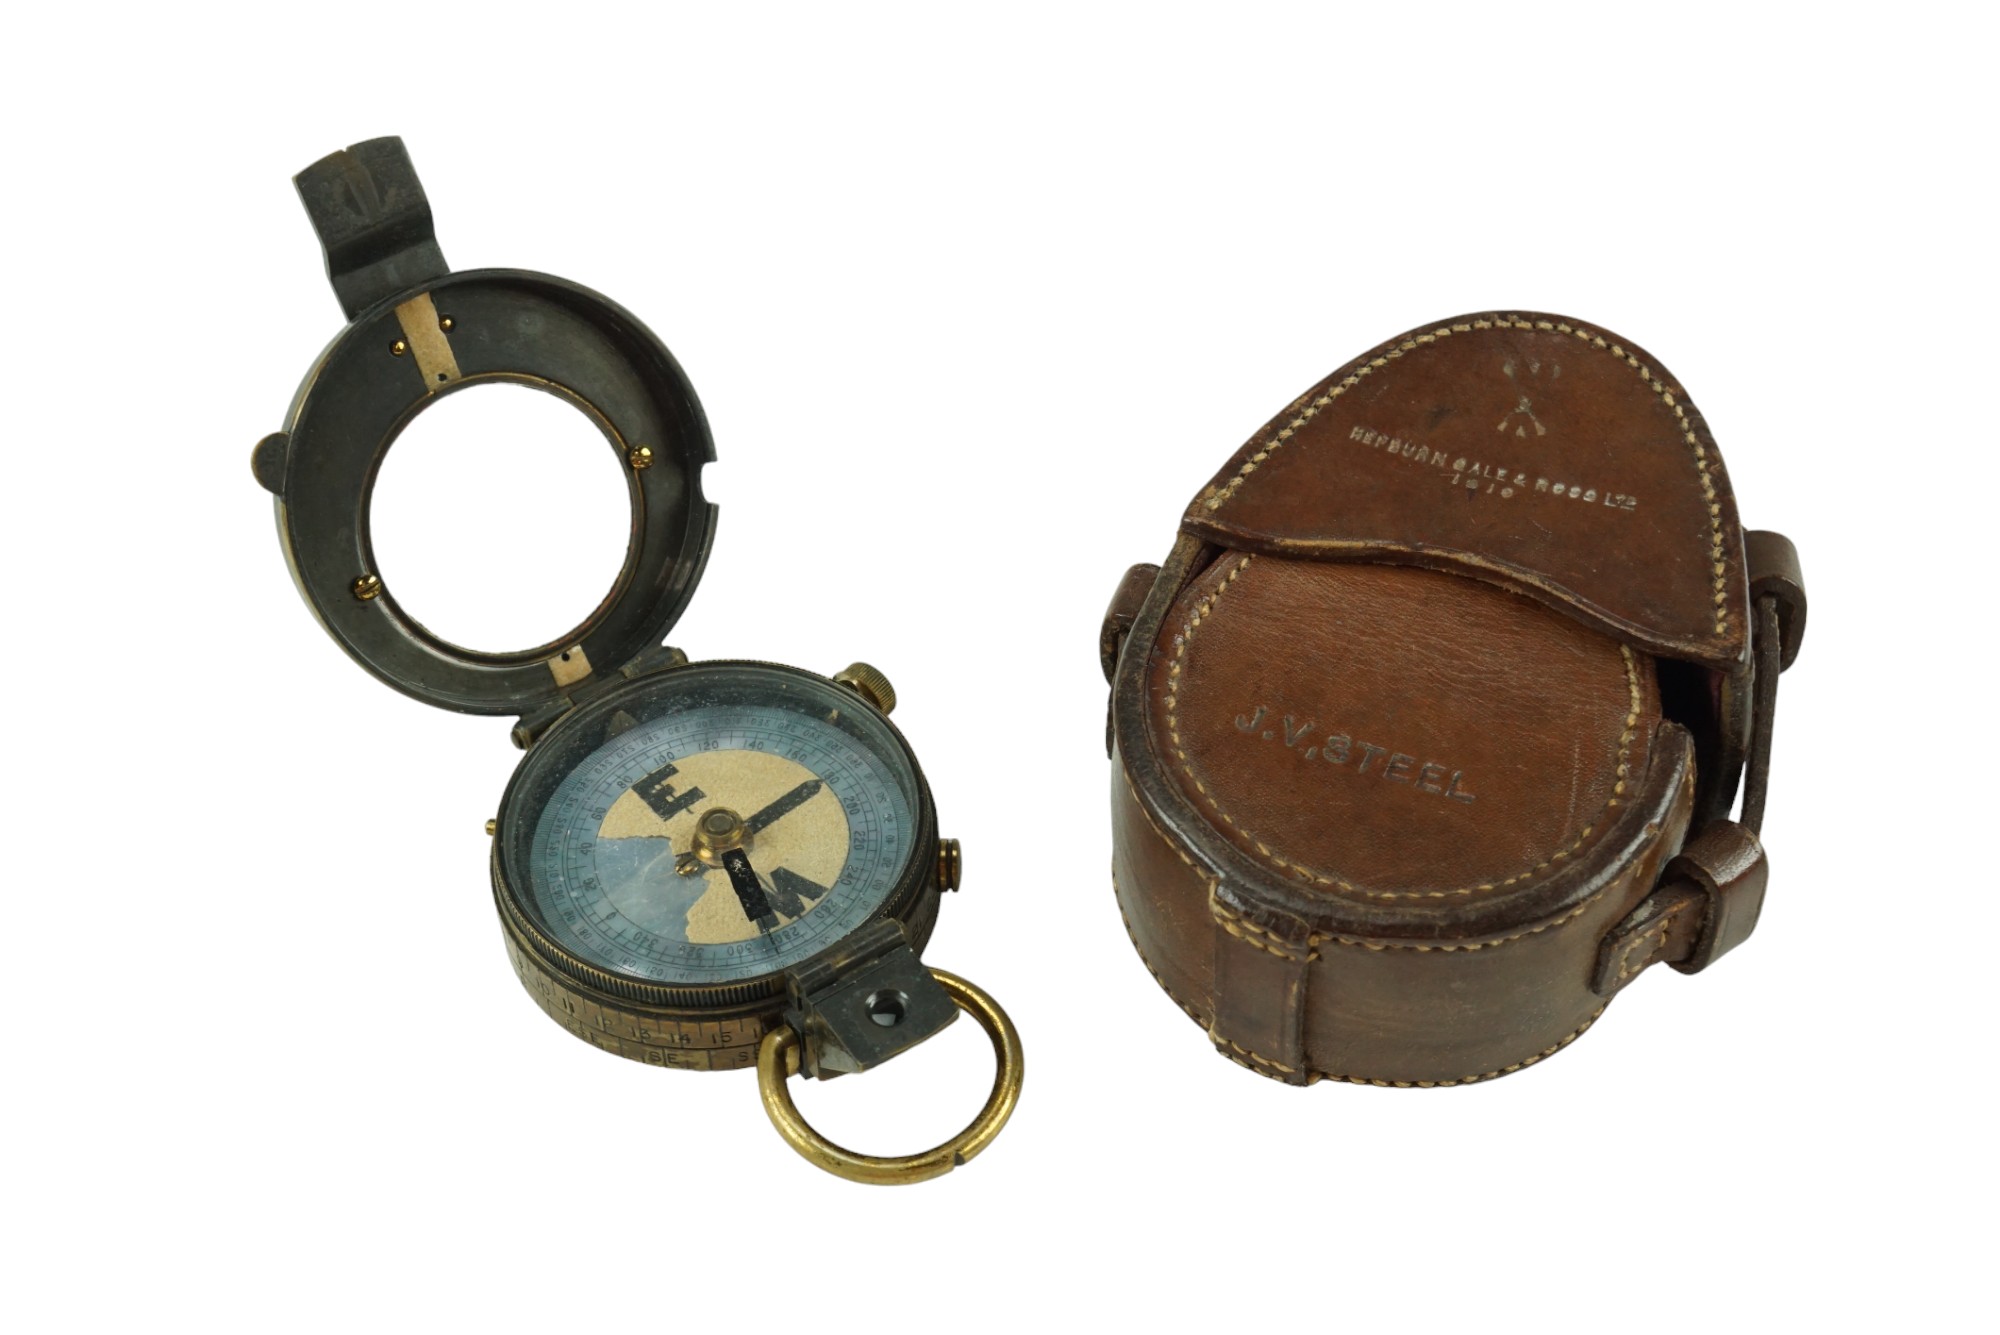 A 1910 date British army prismatic marching compass and leather case, each marked with the name J